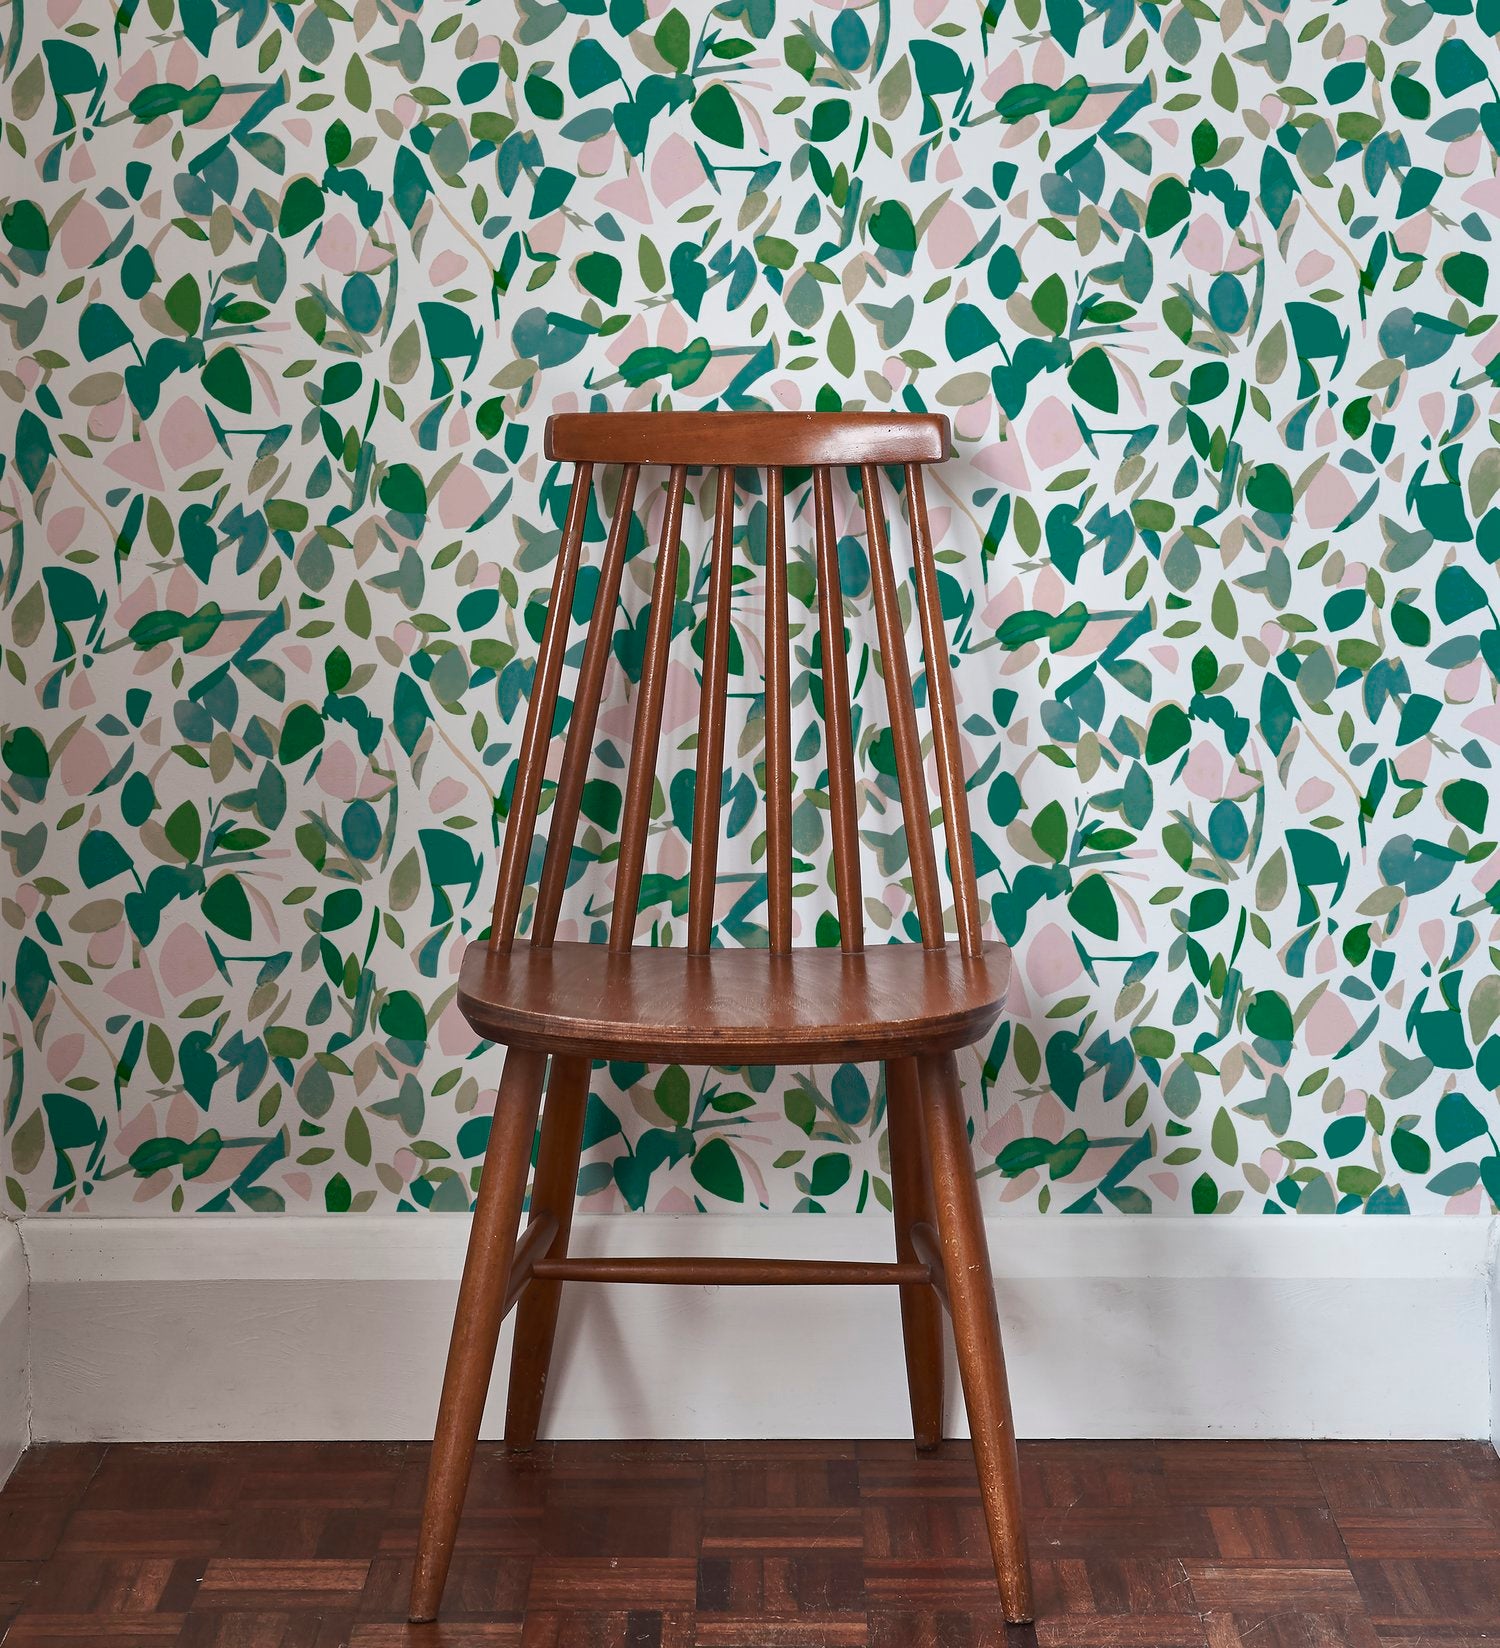 A wooden chair stands in front of a wall papered in a minimal leaf print in shades of green, pink and white.